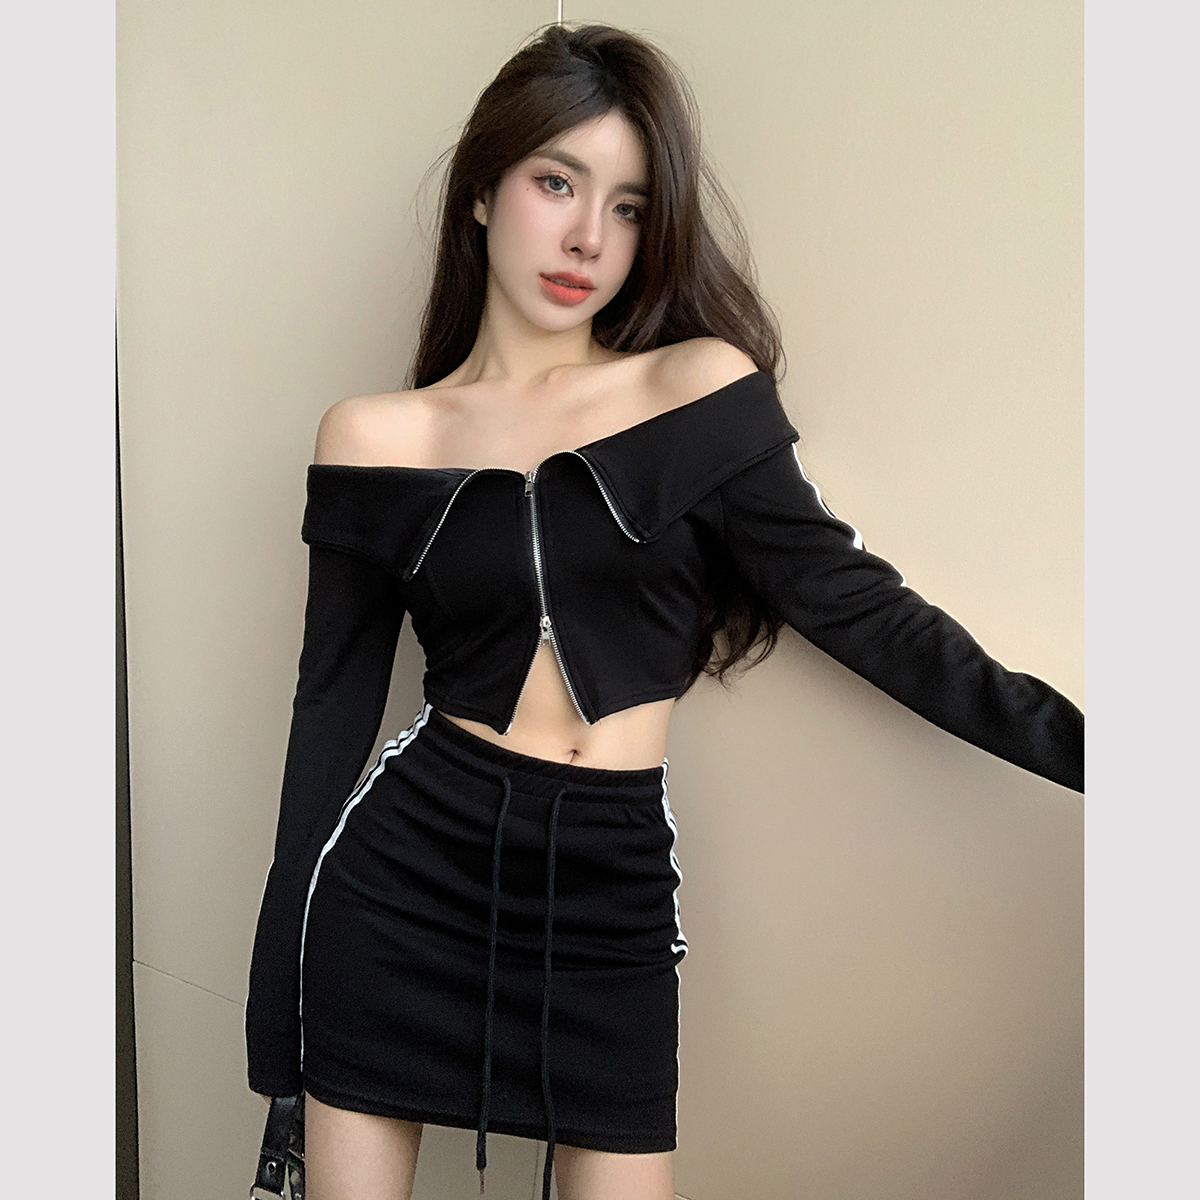 One-shoulder sports and leisure college suit all-match American style bag hip hot girl skirt drawstring two-piece set